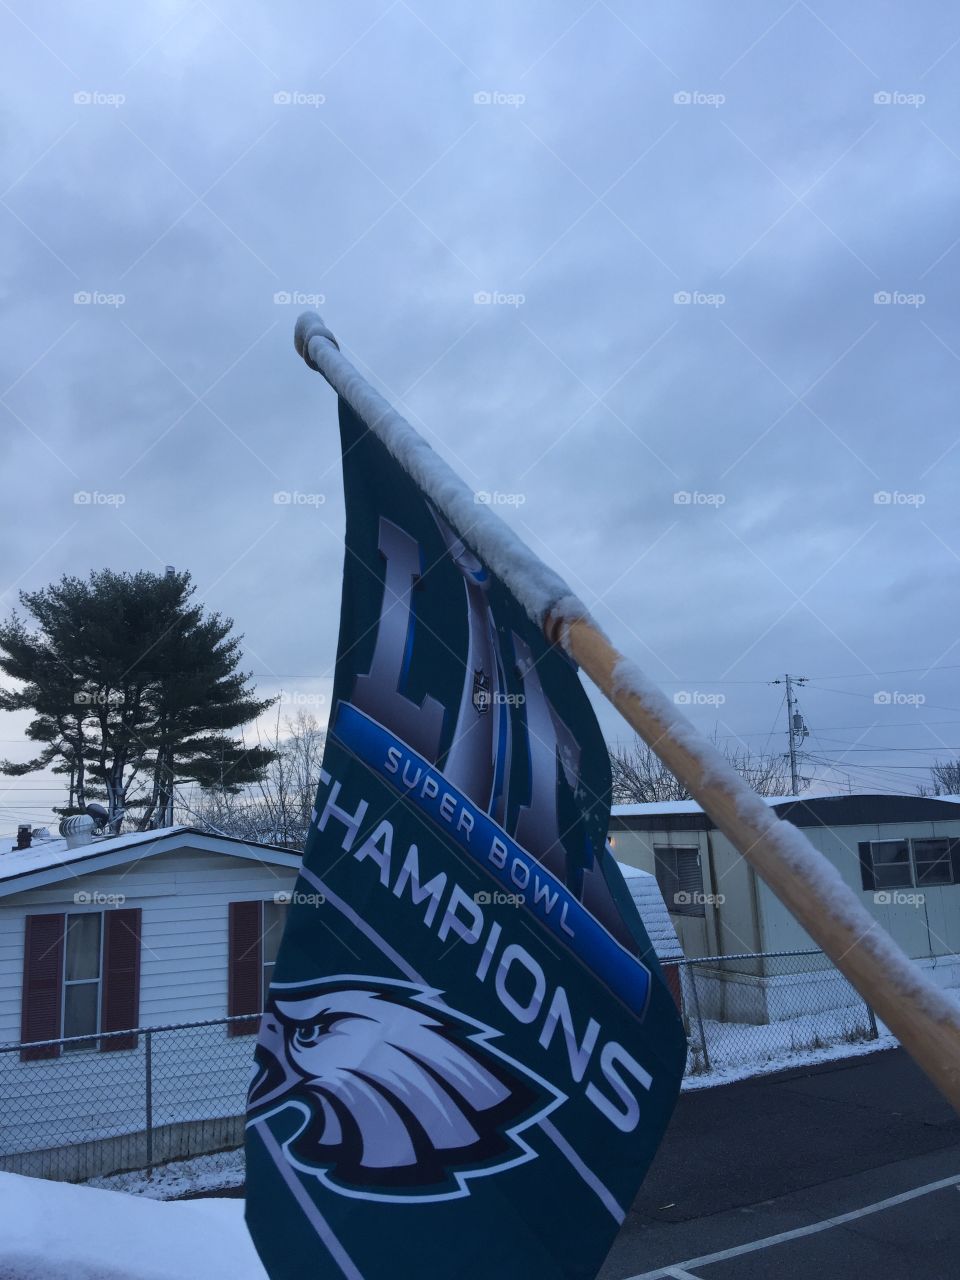 Fly Eagles fly eagles win the super bowl I Bleed green 